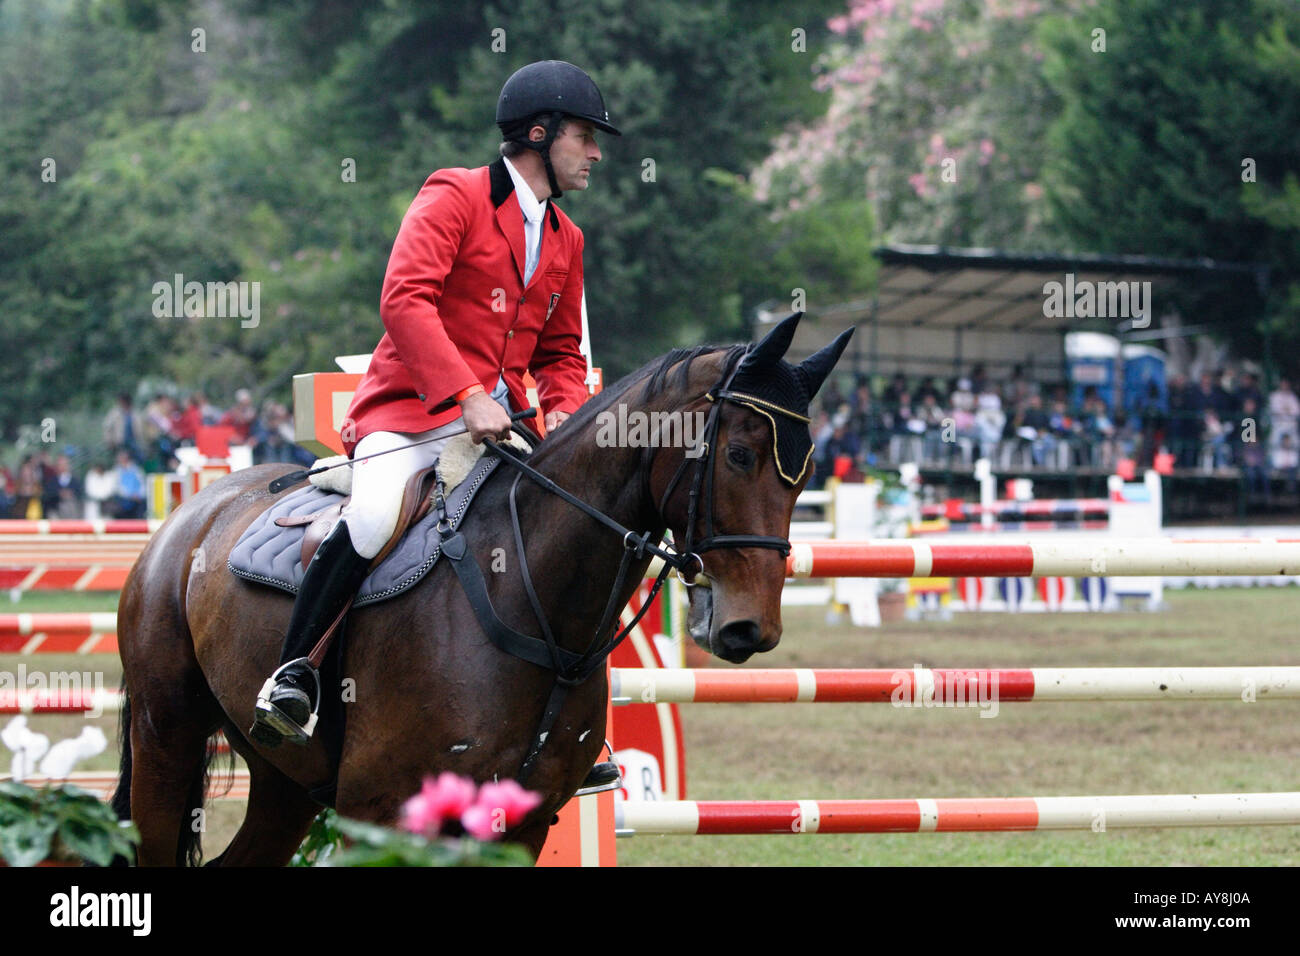 equestrian on horse at horse jumping competition Stock Photo